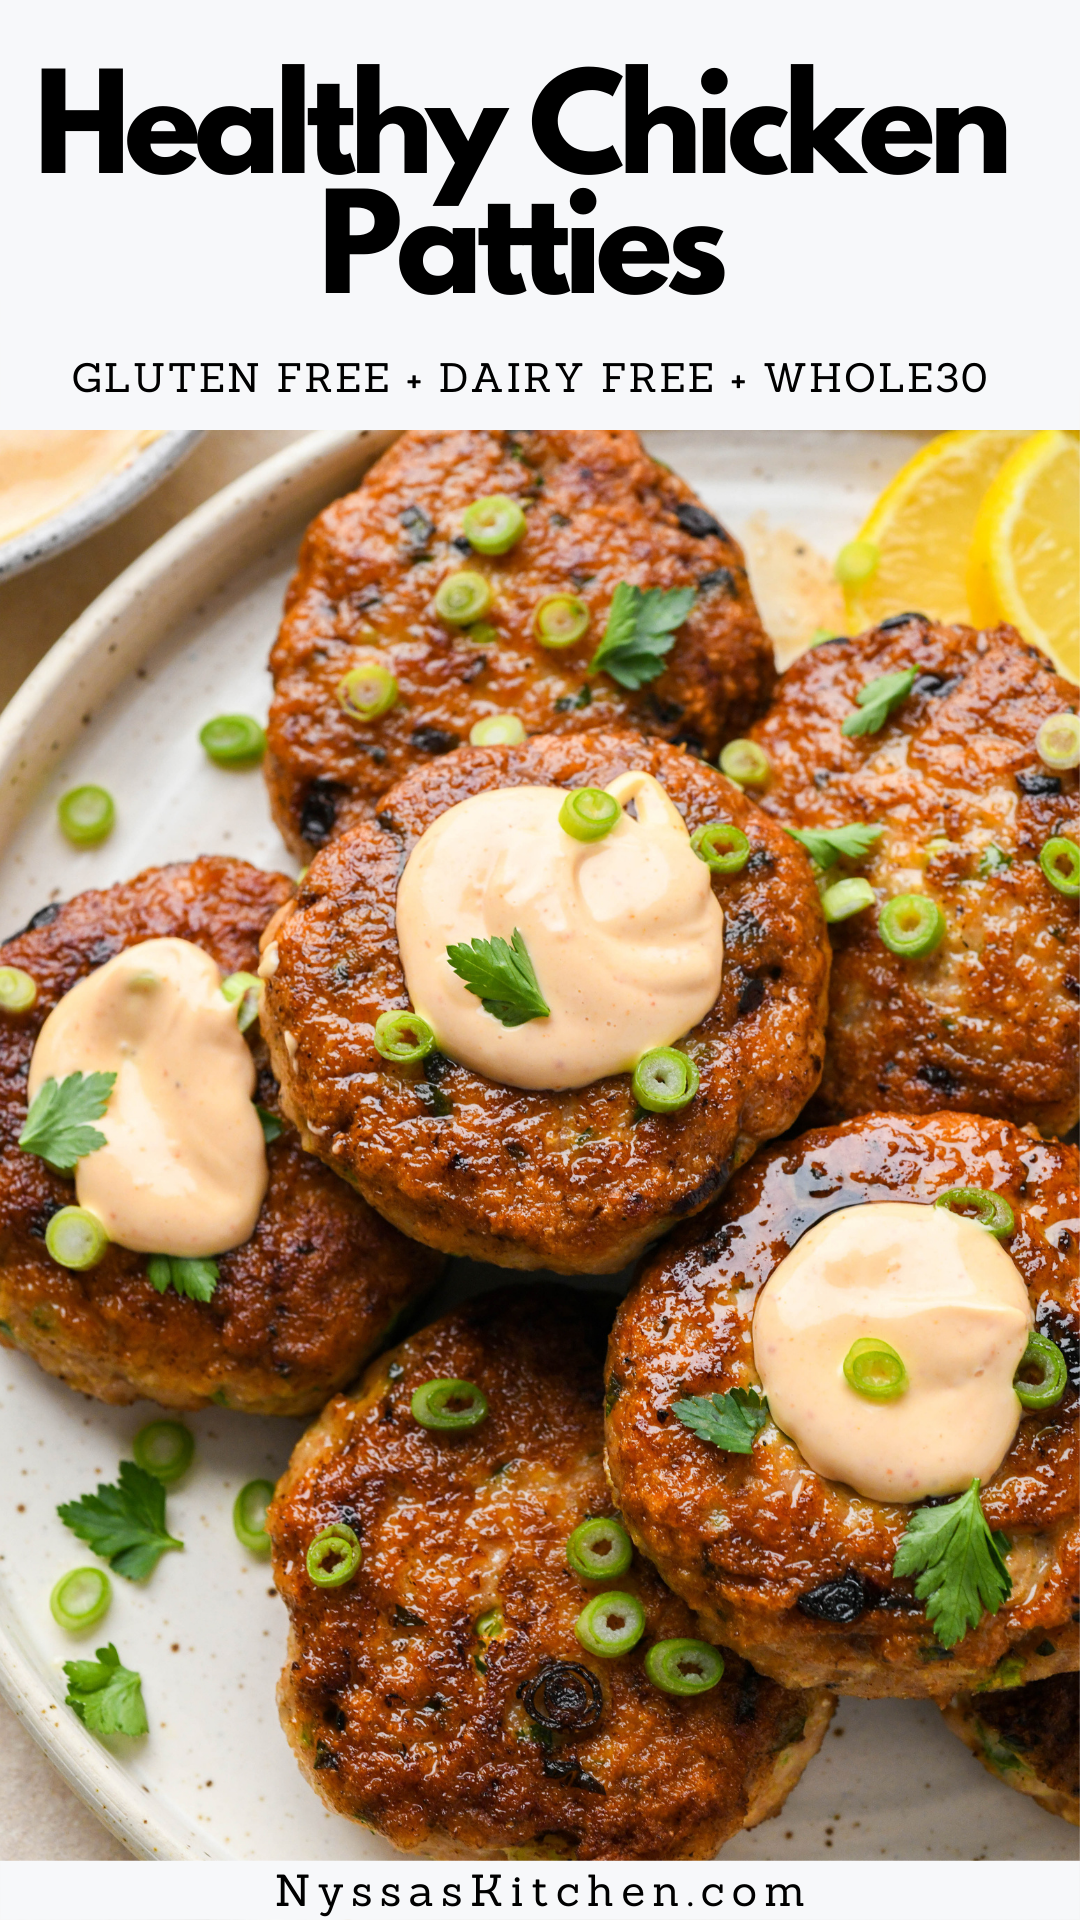 These healthy chicken patties are a delicious protein rich Whole30 dinner option! Made with ground chicken, flavorful spices, green onions, and fresh herbs. Perfect on their own or served with a big green salad or side vegetable. Whole30, gluten free, dairy free, keto, low carb.